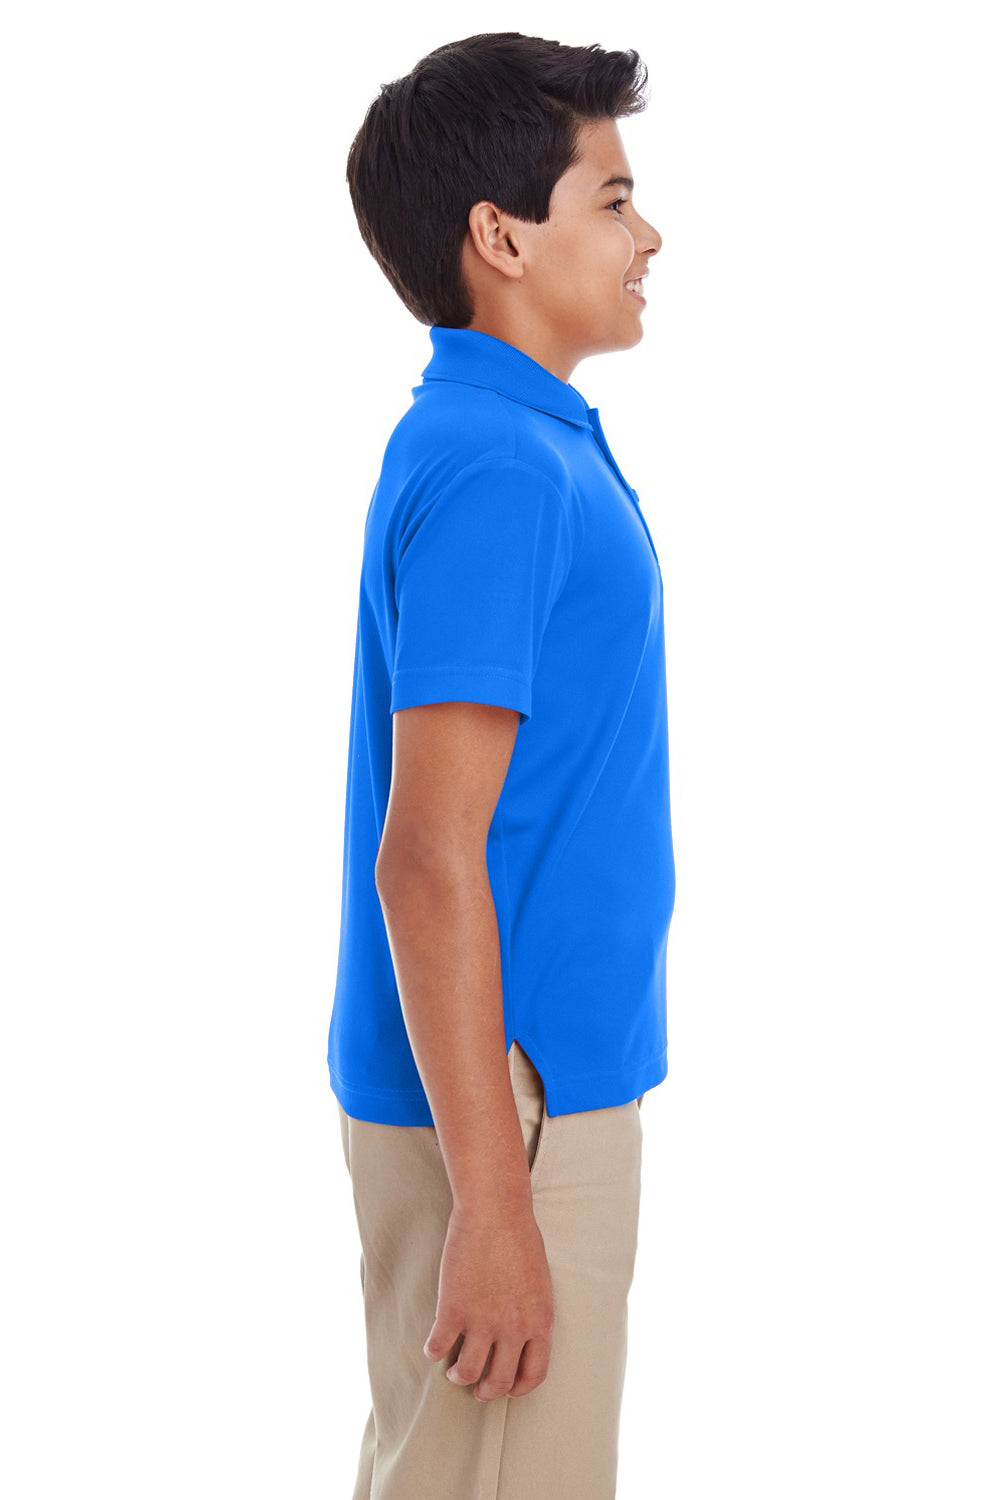 Core 365 88181Y Youth Origin Performance Moisture Wicking Short Sleeve Polo Shirt Royal Blue Side